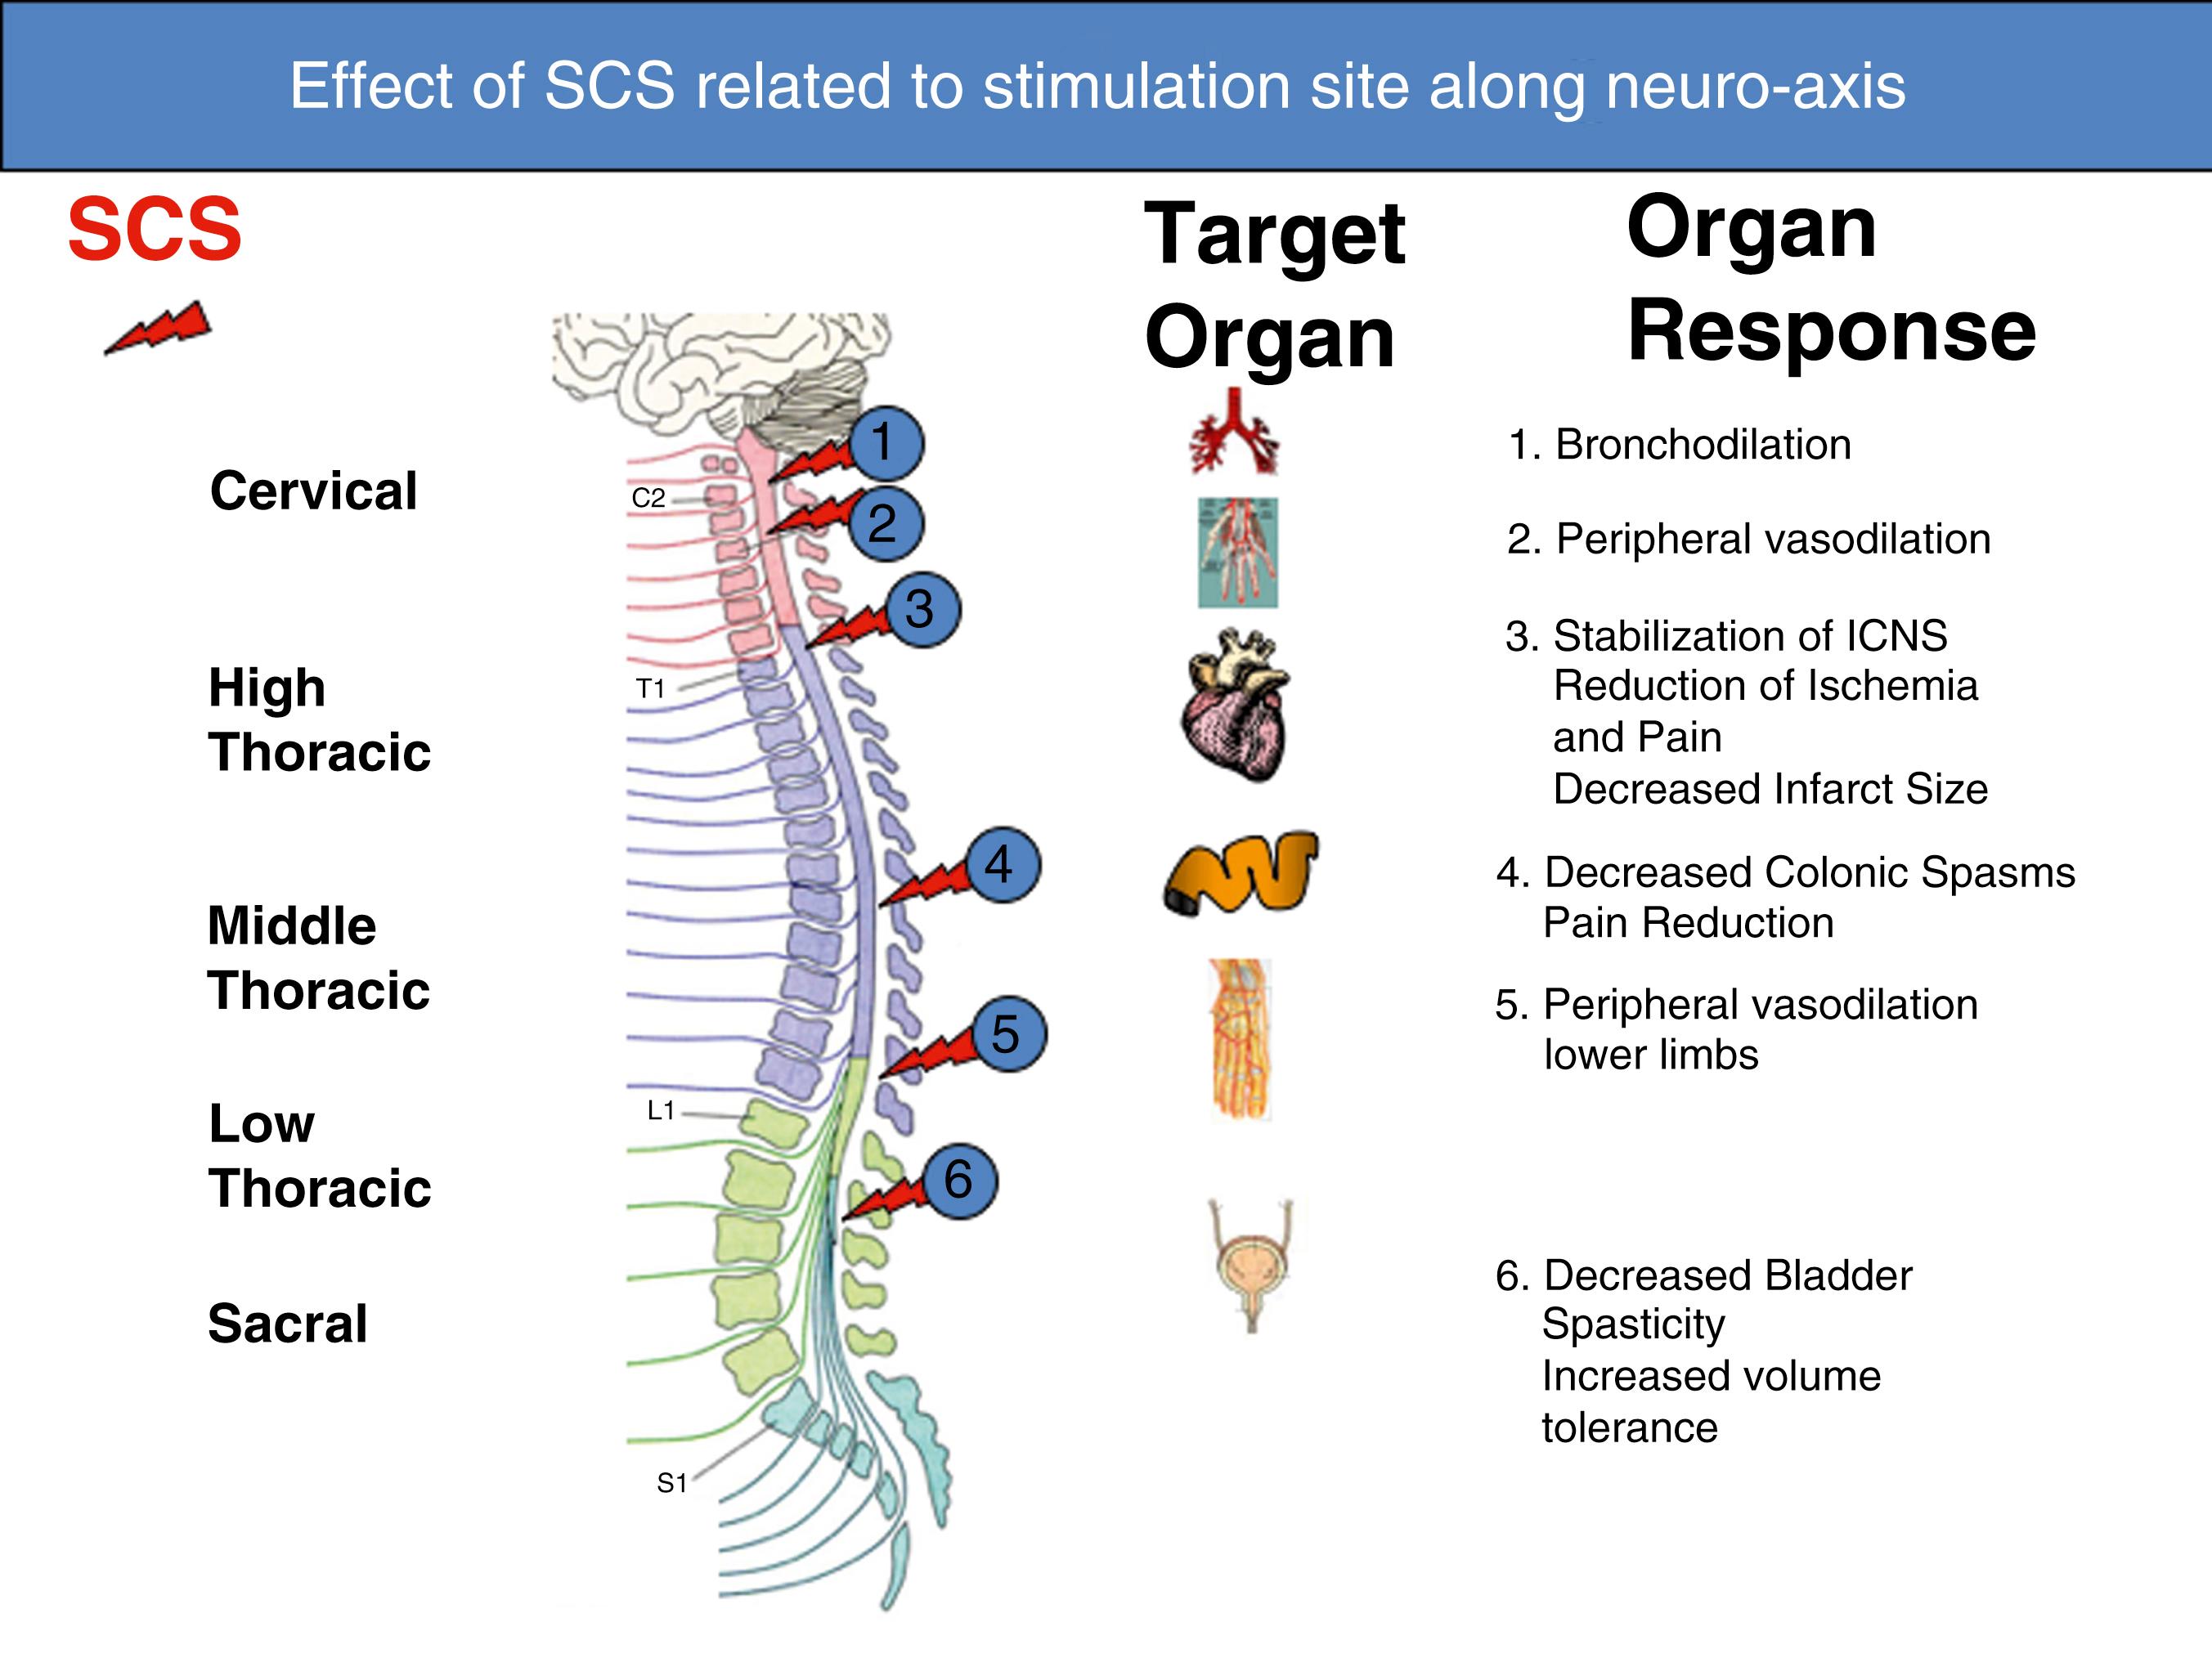 FIGURE 119.2, This figure illustrates how SCS applied to different regions of the spinal cord, besides the effect on neuropathic pain, also induces changes in the function of different target organs via local autonomic activity changes, dorsal root reflexes and viscero-somatic reflexes. The numbers on the lightning bolts refer to numbers on the organ responses to the right of the figure.